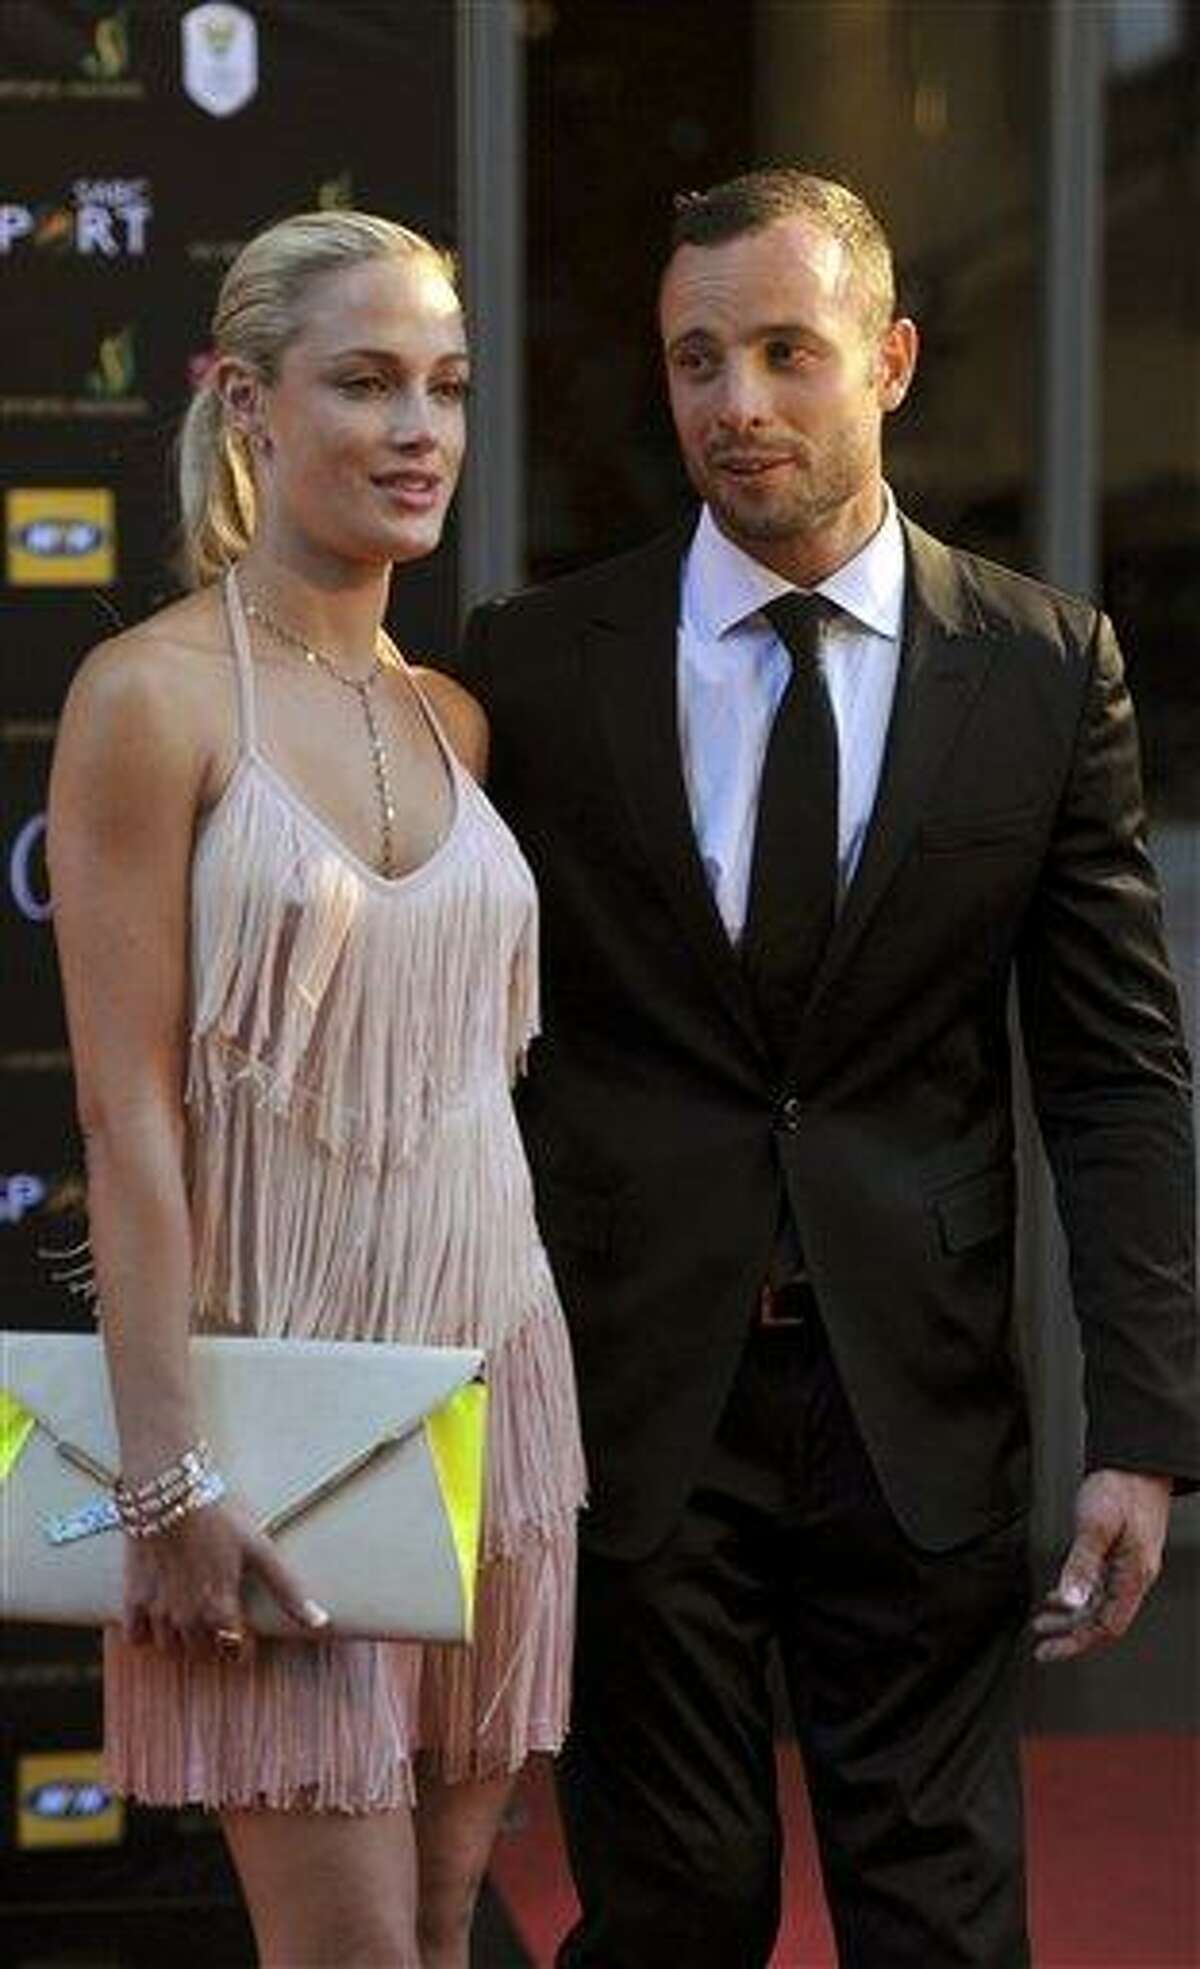 South African Olympic athlete Oscar Pistorius and Reeva Steenkamp, believed to be his girlfriend, at an awards ceremony, in Johannesburg, South Africa. Olympic athlete Oscar Pistorius was taken into custody and was expected to appear in court Thursday, Feb. 14, 2013, after a 30-year-old woman who was believed to be his girlfriend was shot dead at his home in South Africa's capital, Pretoria. (AP Photo/Lucky Nxumalo-Citypress) SOUTH AFRICA OUT